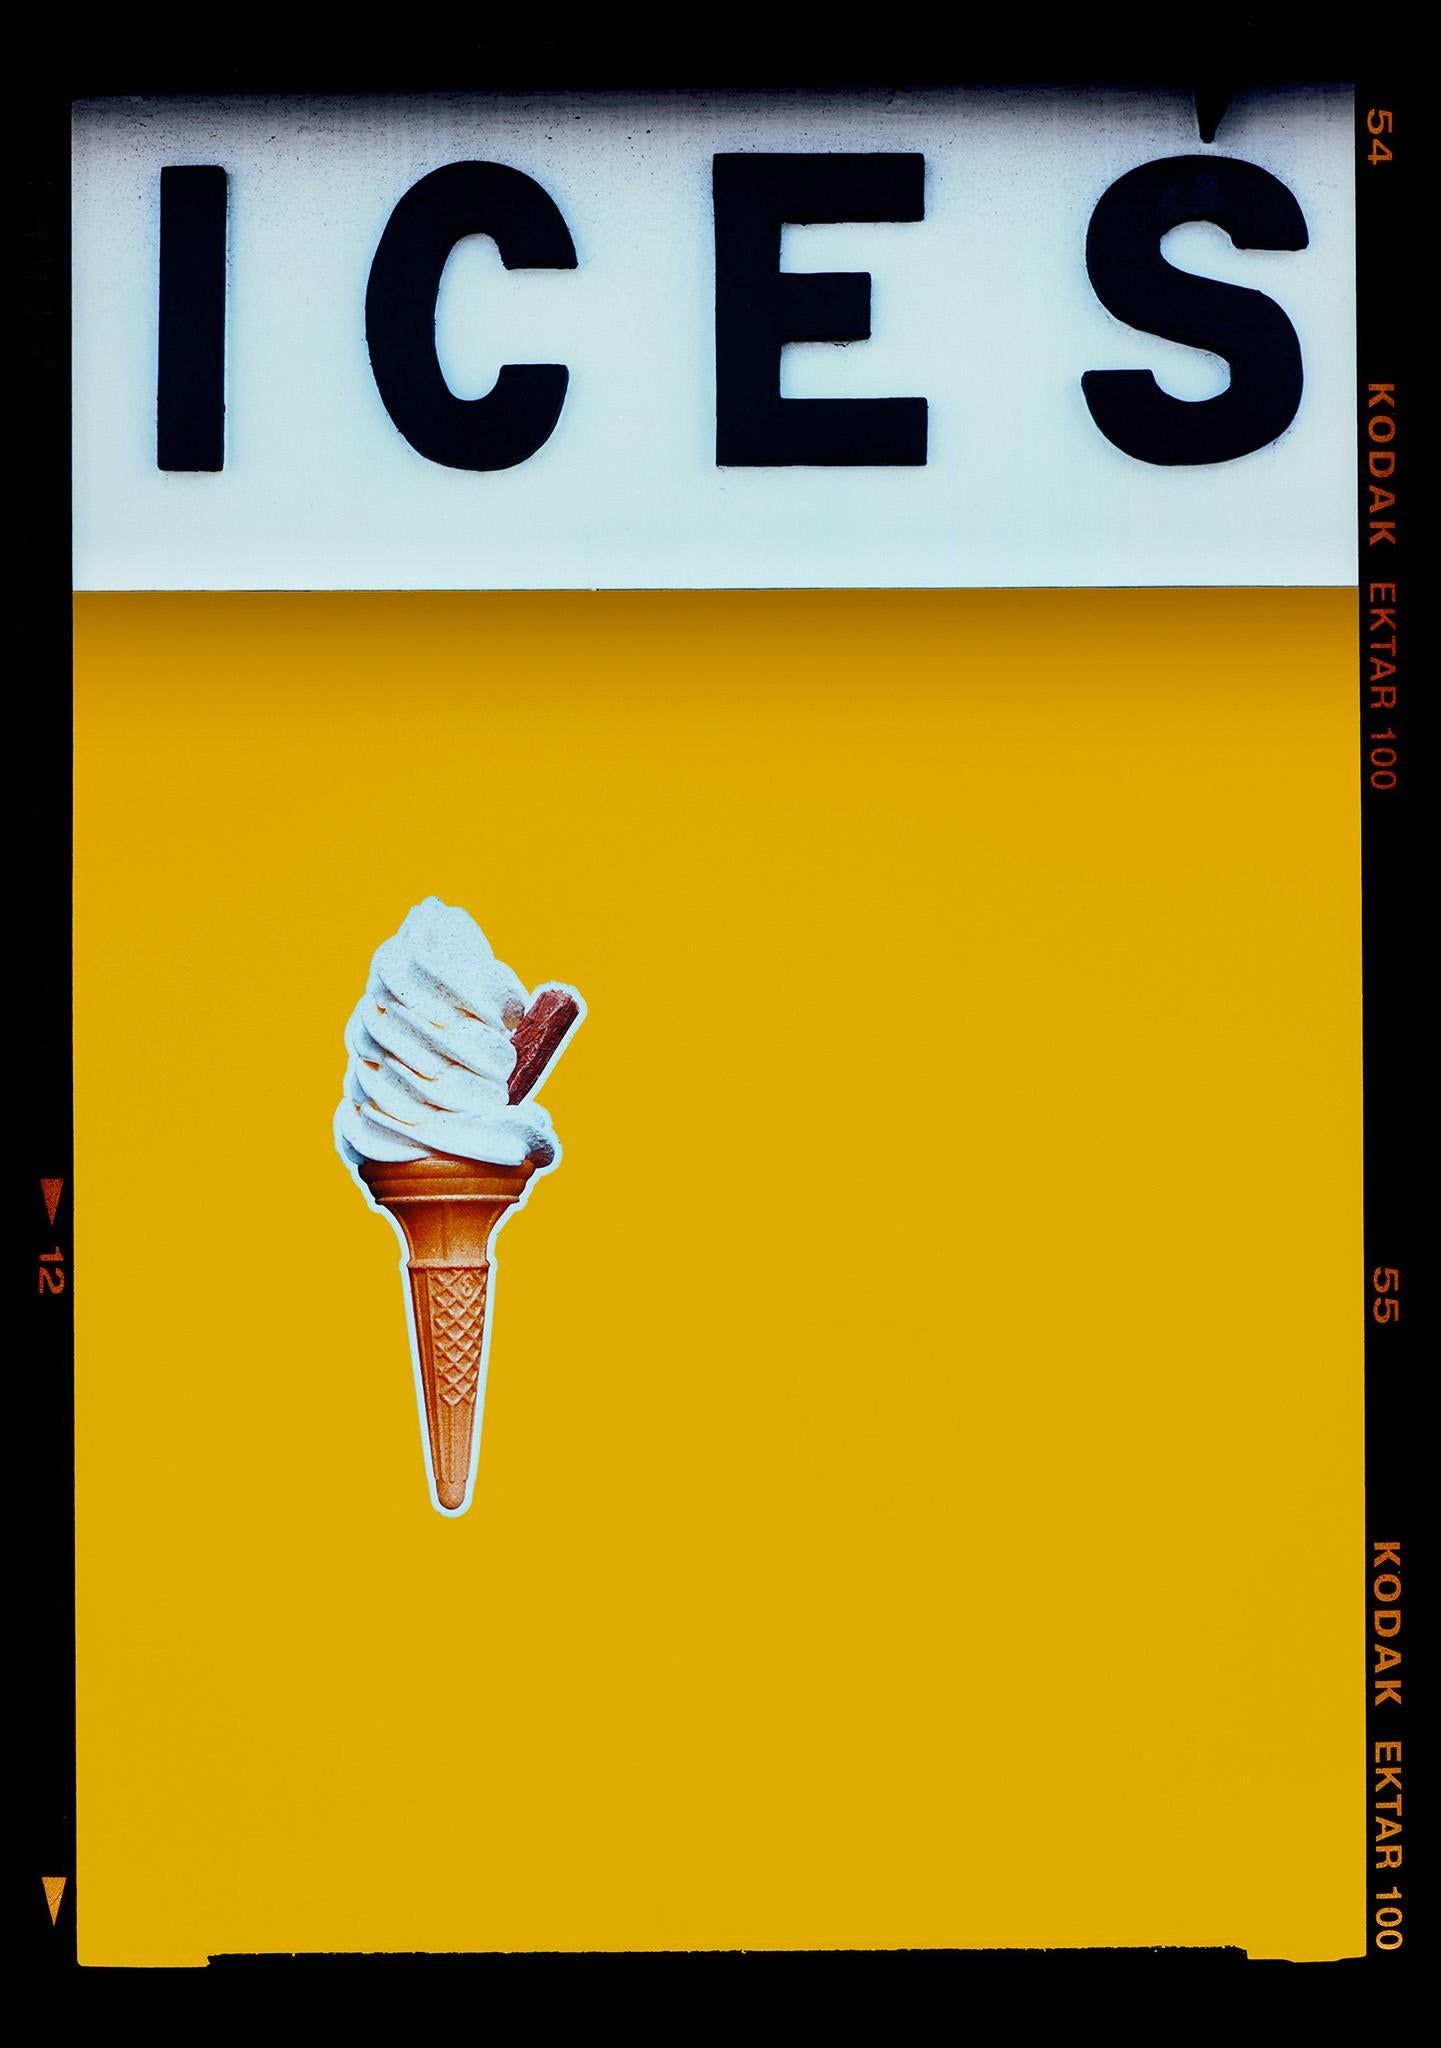 Ices (Mustard Yellow), Bexhill-on-Sea - British Pop Art Color Photography